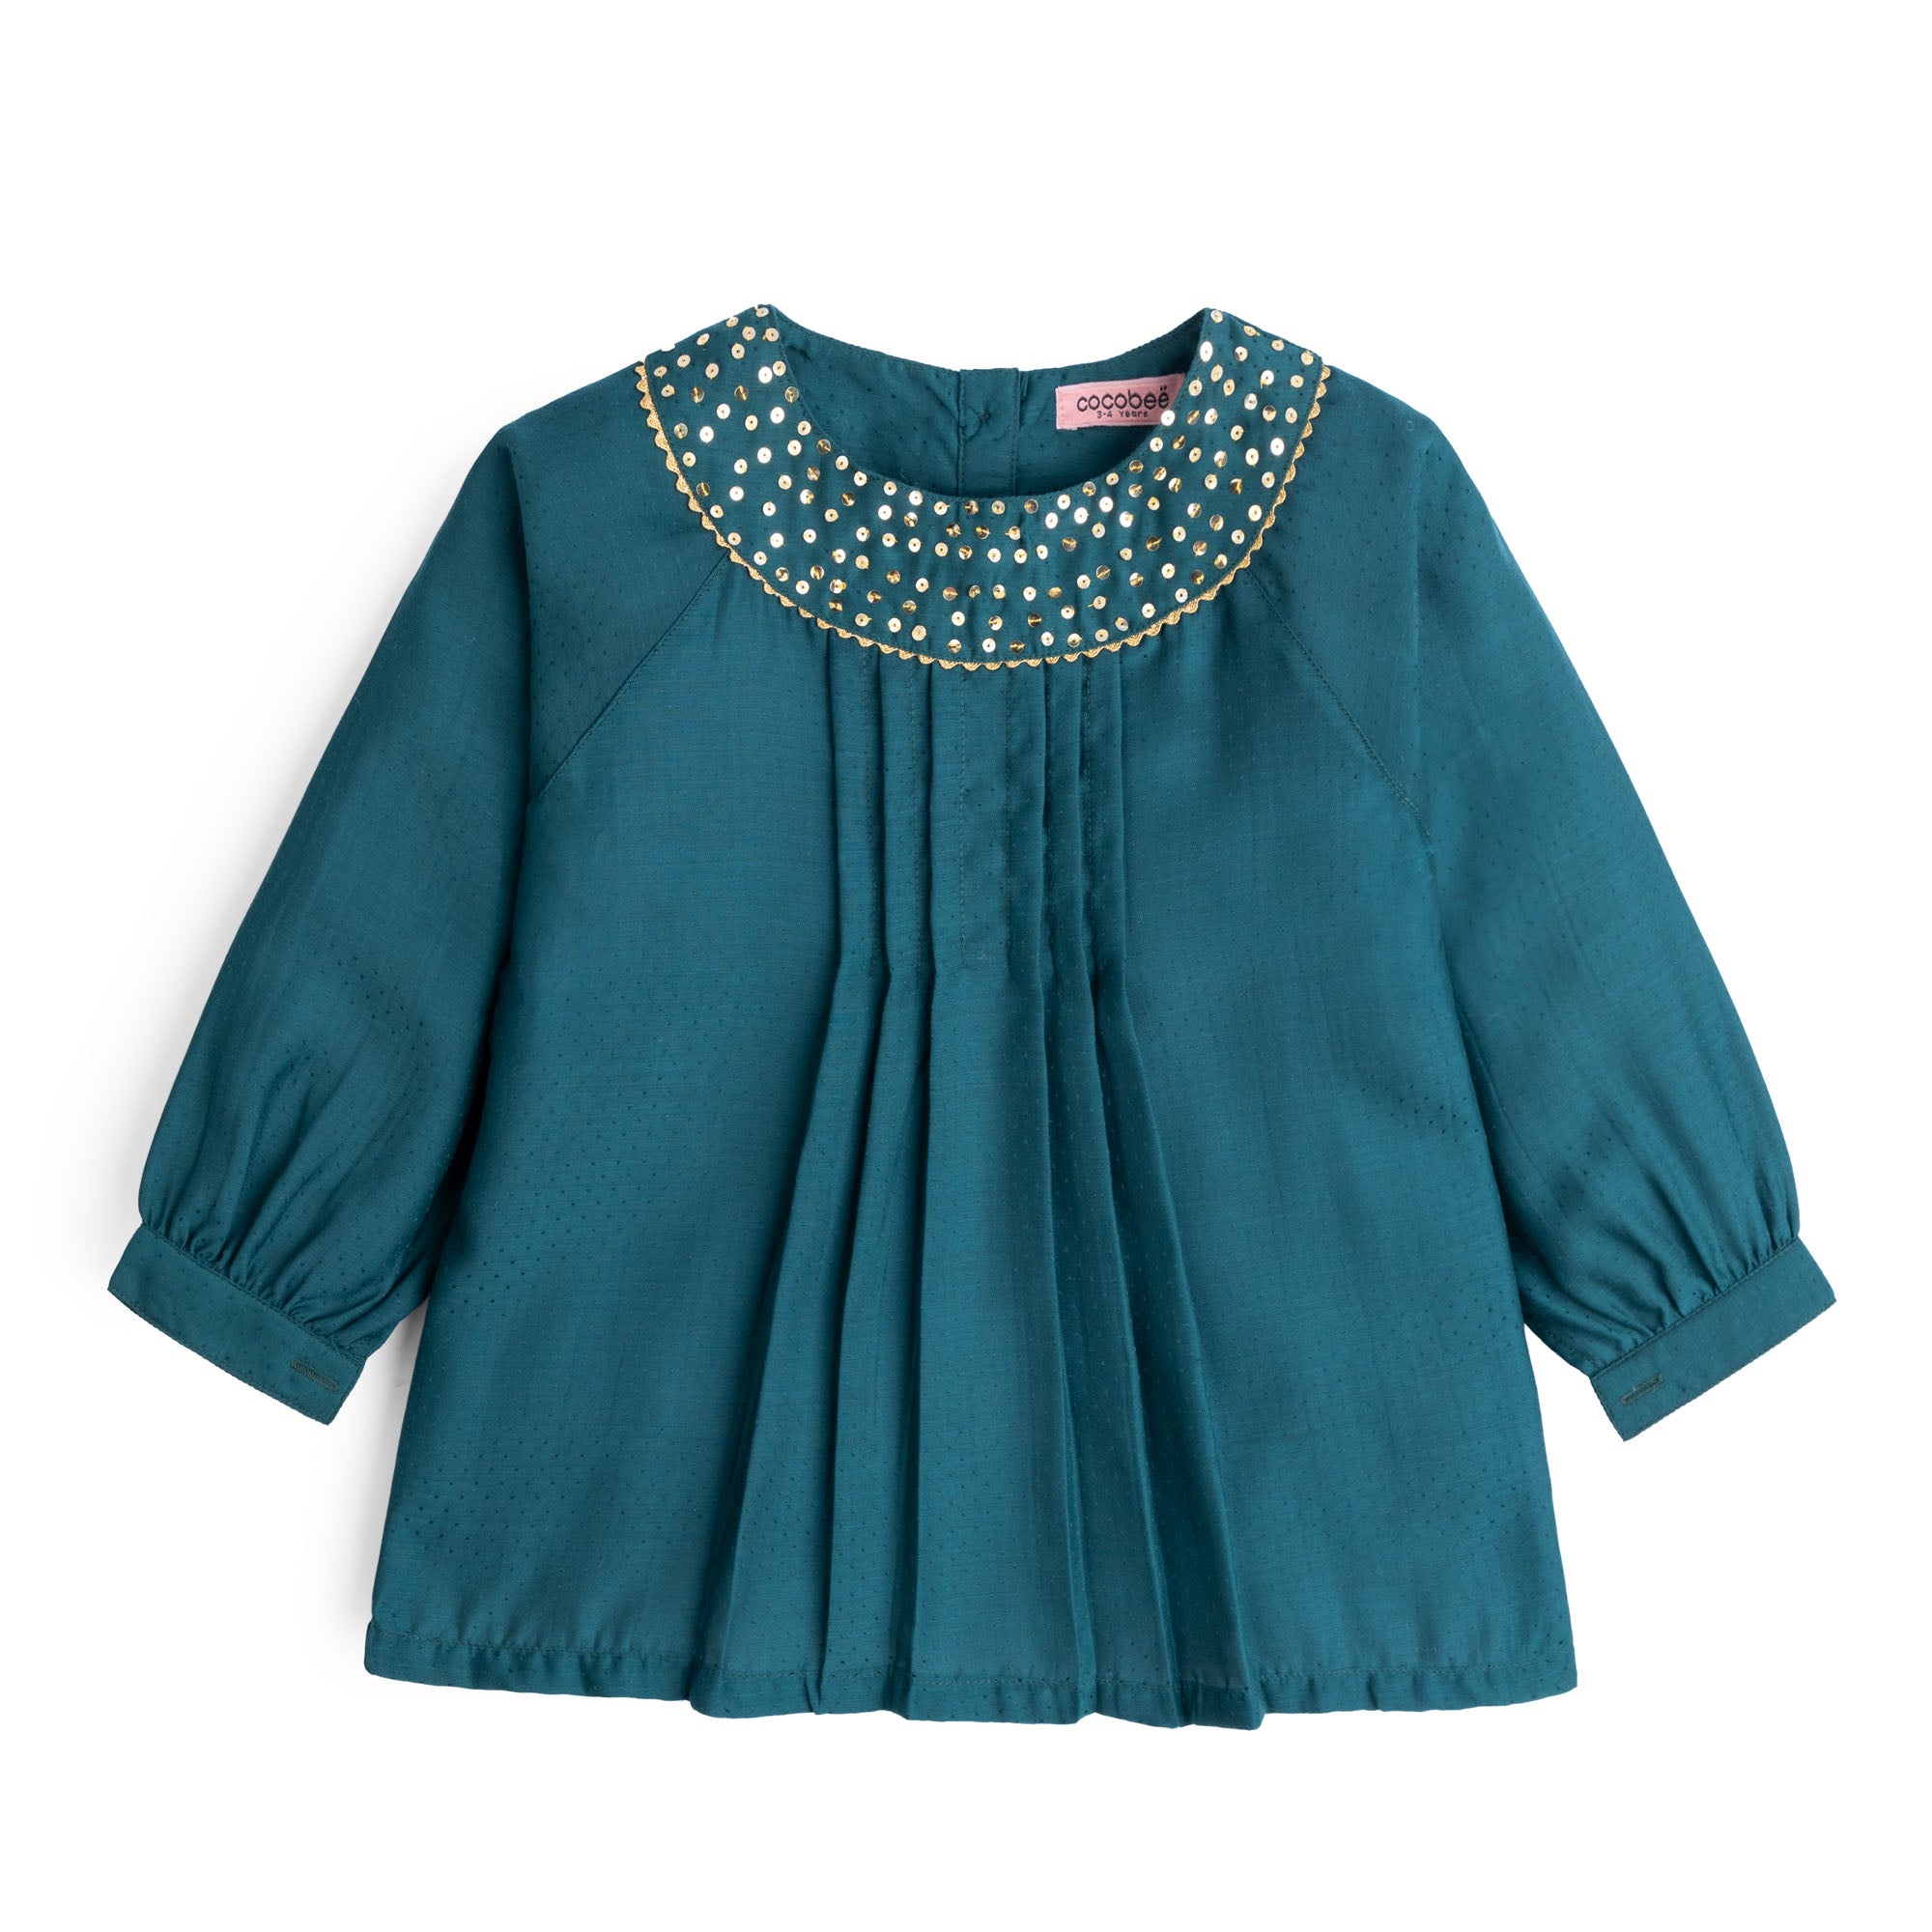 Teal Blue Sequined Top